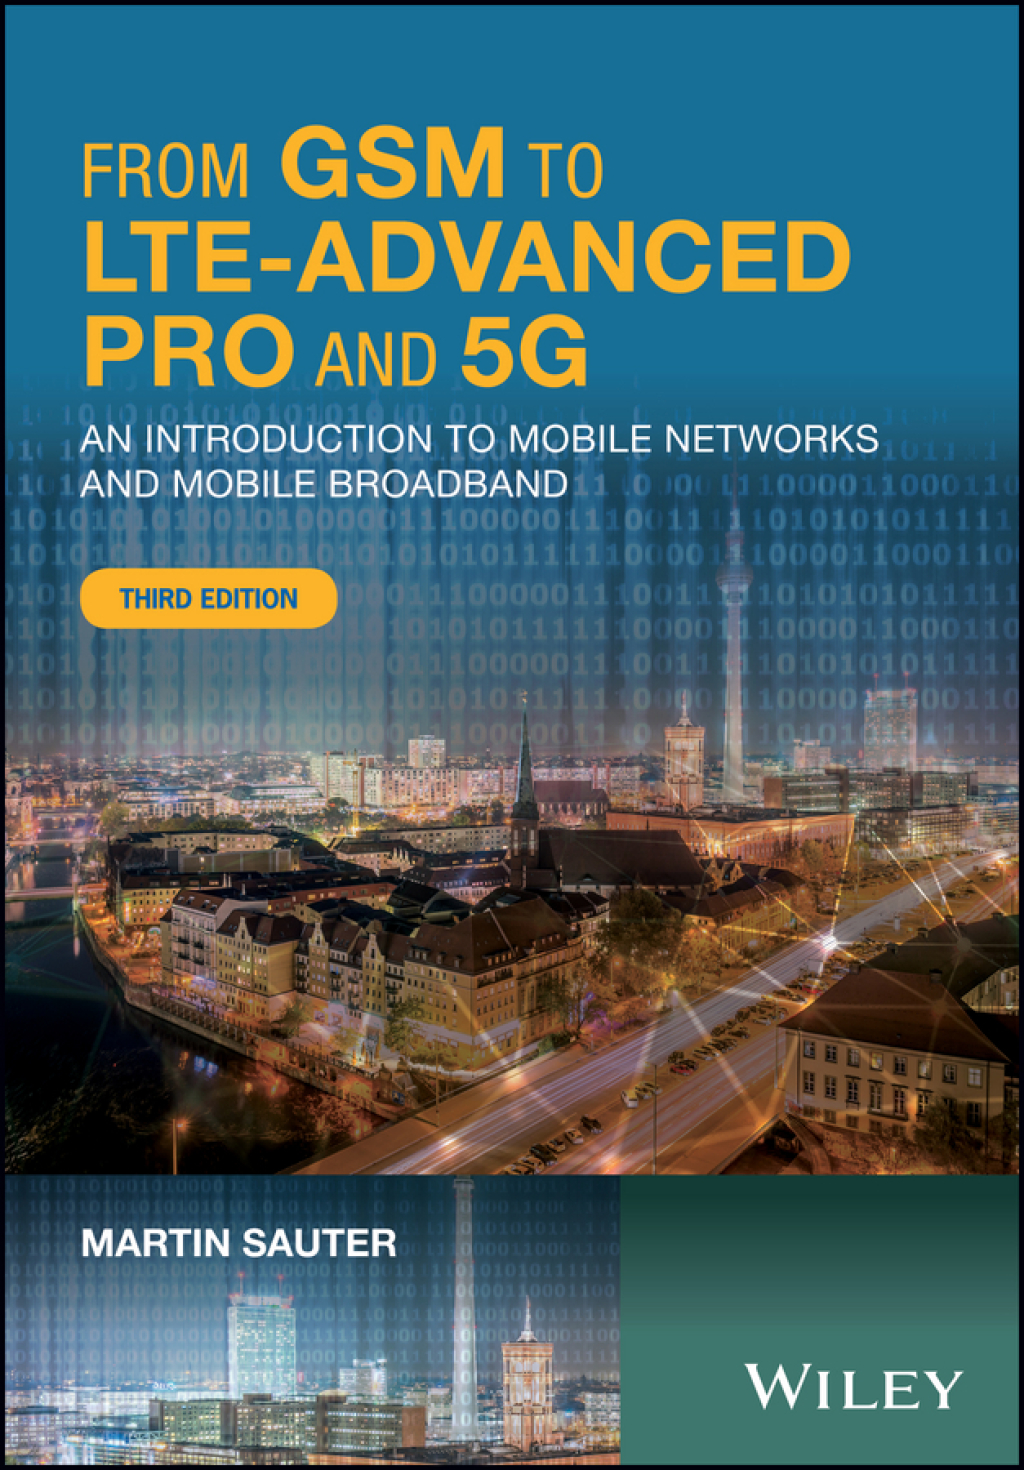 From GSM to LTE-Advanced Pro and 5G: An Introduction to Mobile Networks and Mobile Broadband (eBook) - Martin Sauter